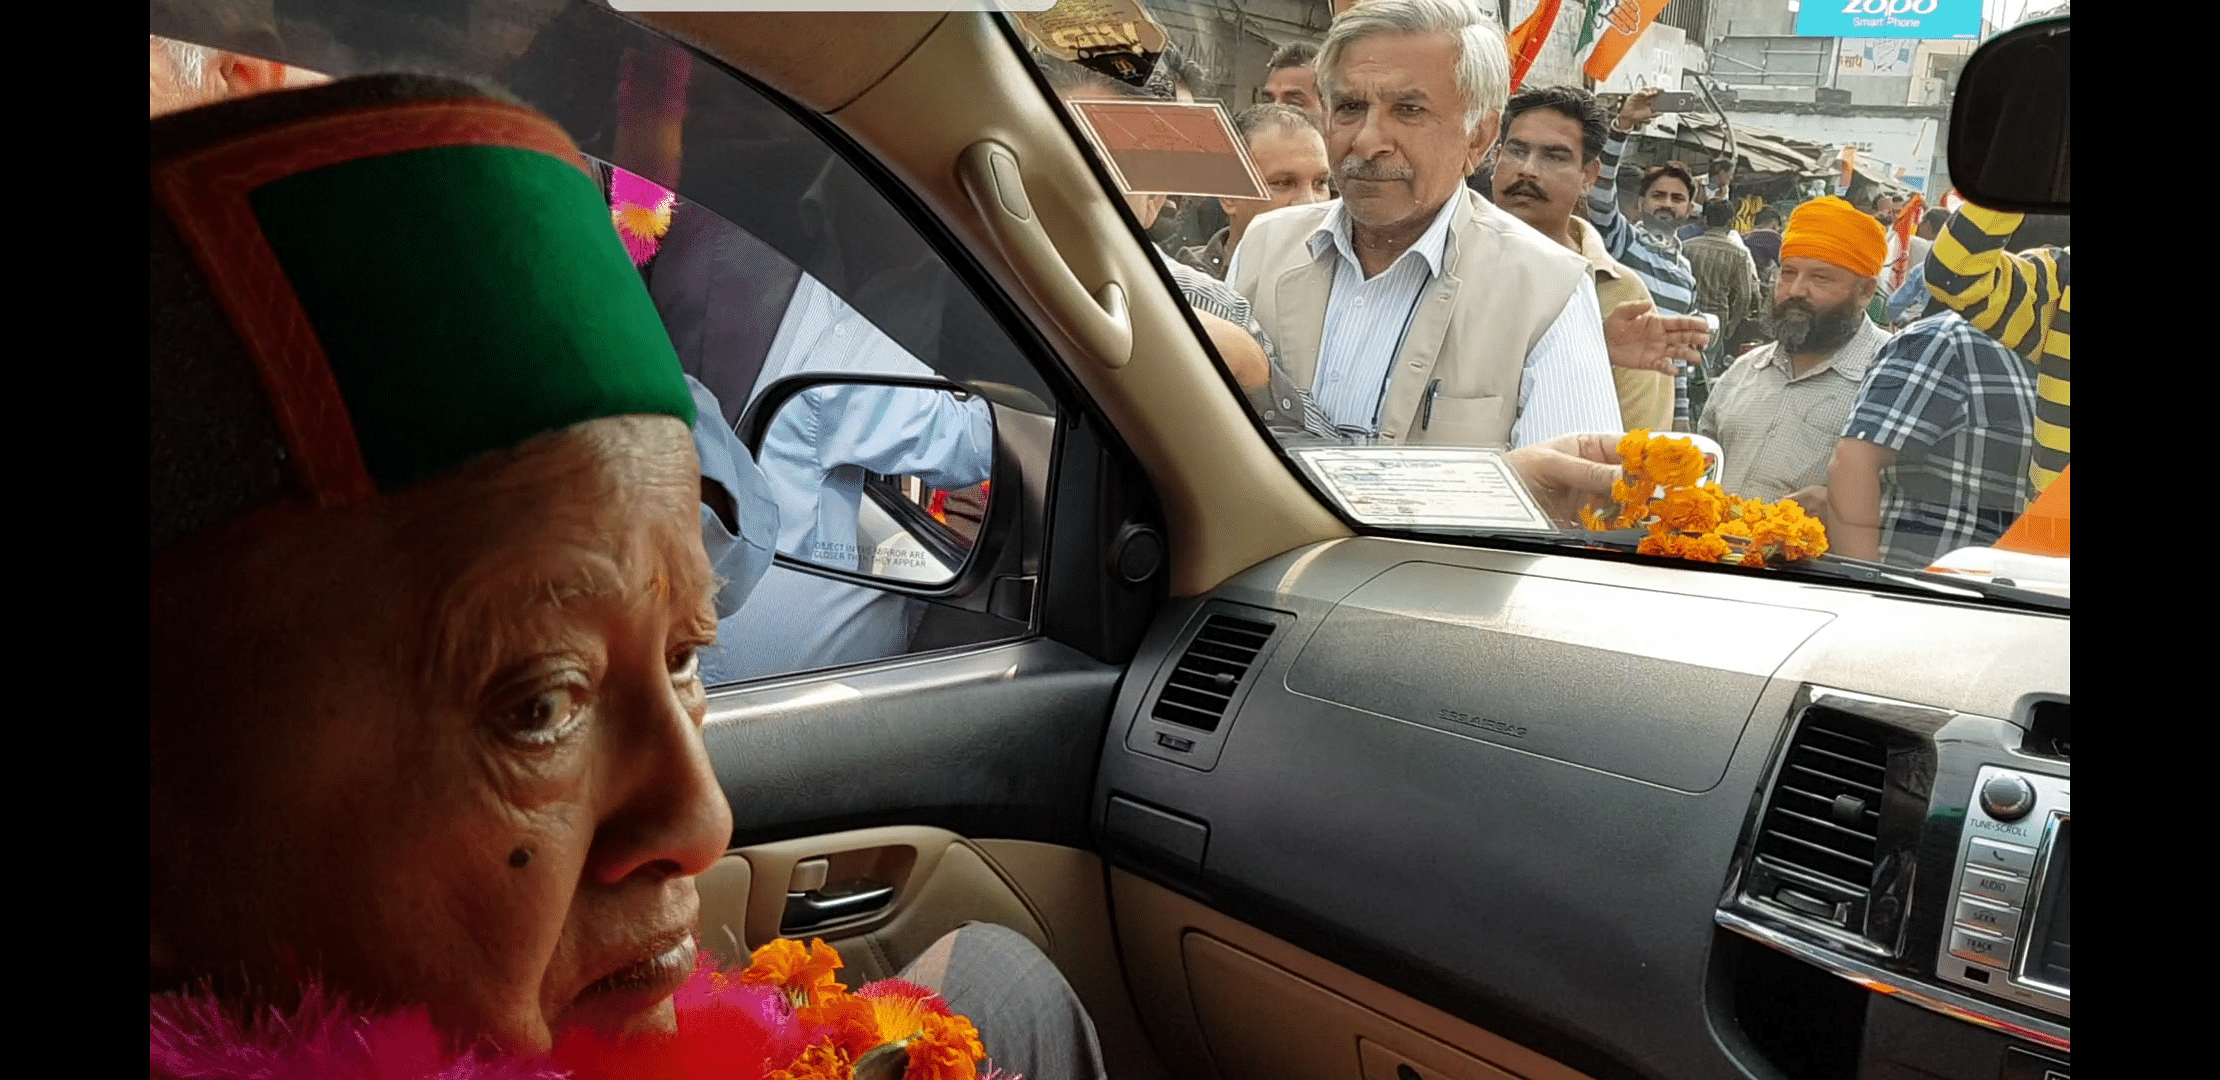 Virbhadra Singh while on the campaign trail in Himachal Pradesh